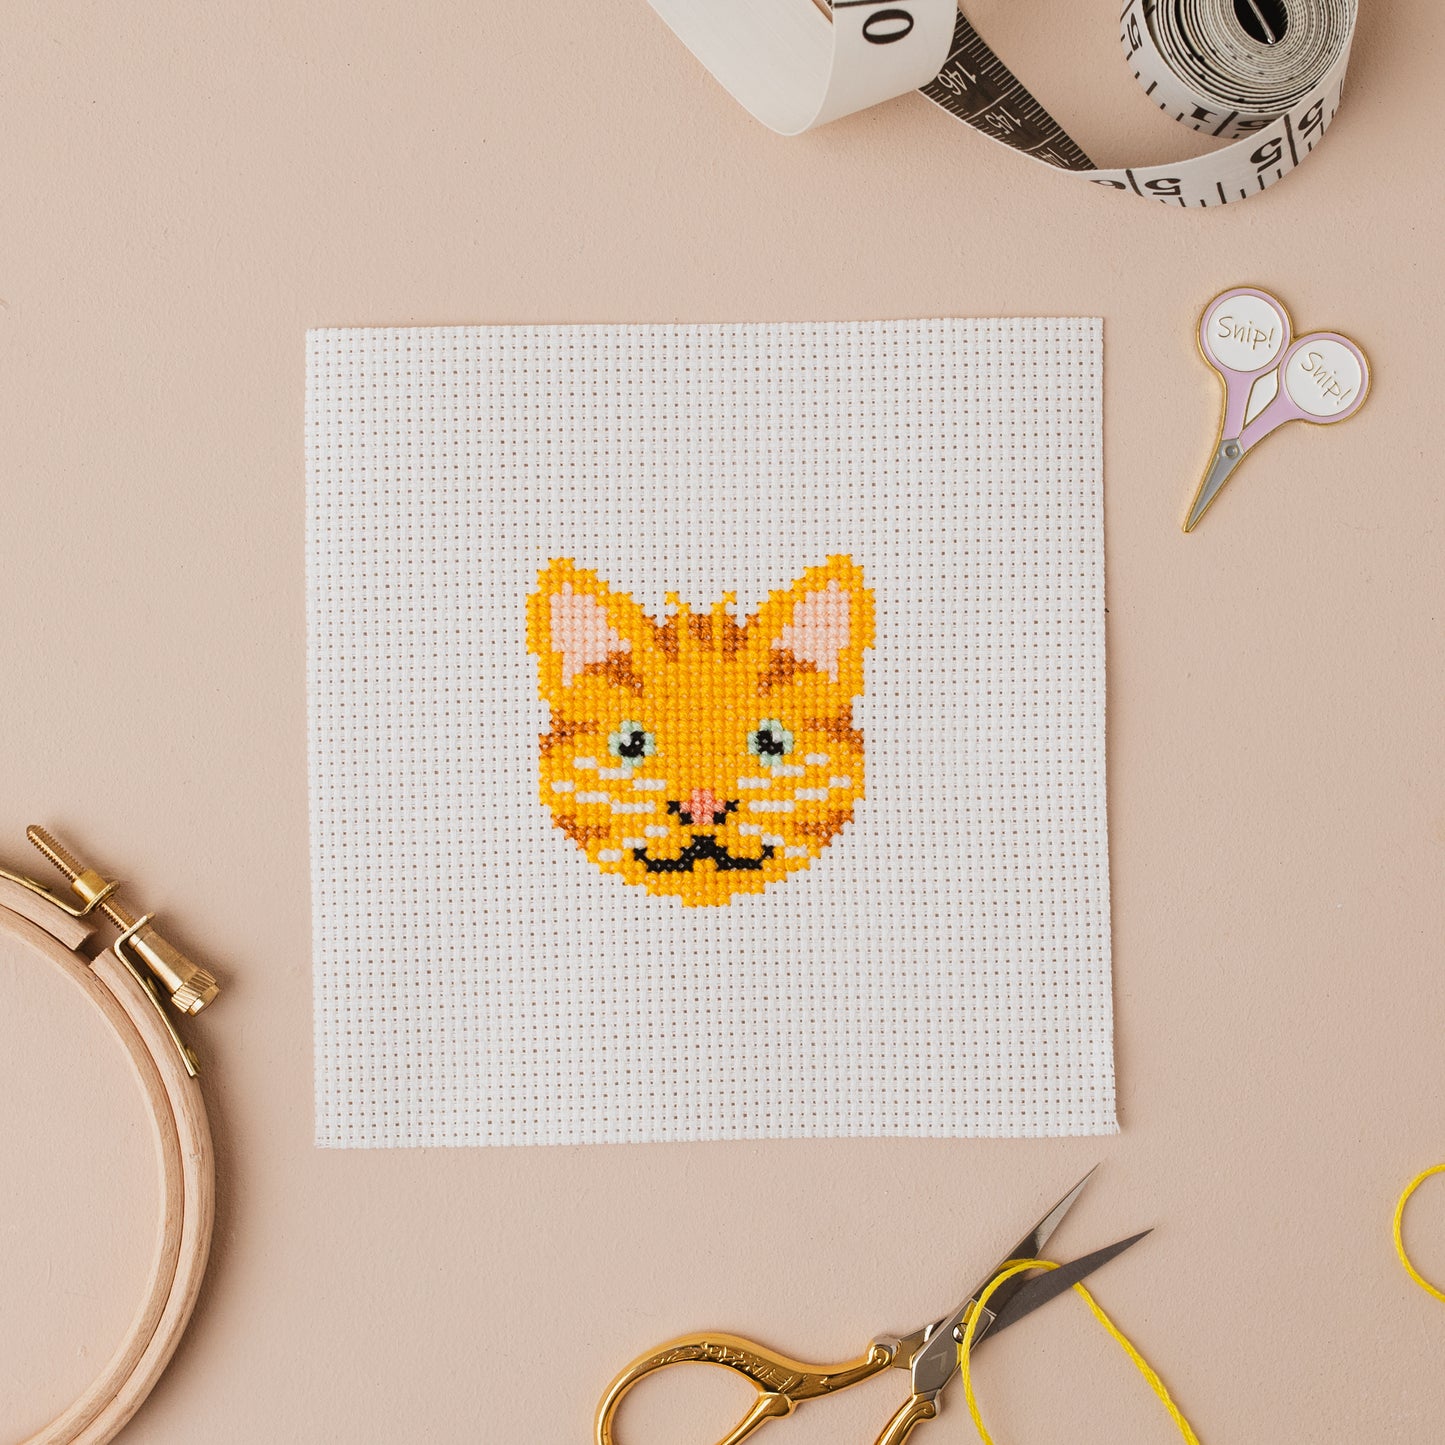 Ginger Cat Mini Counted Cross Stitch Kit